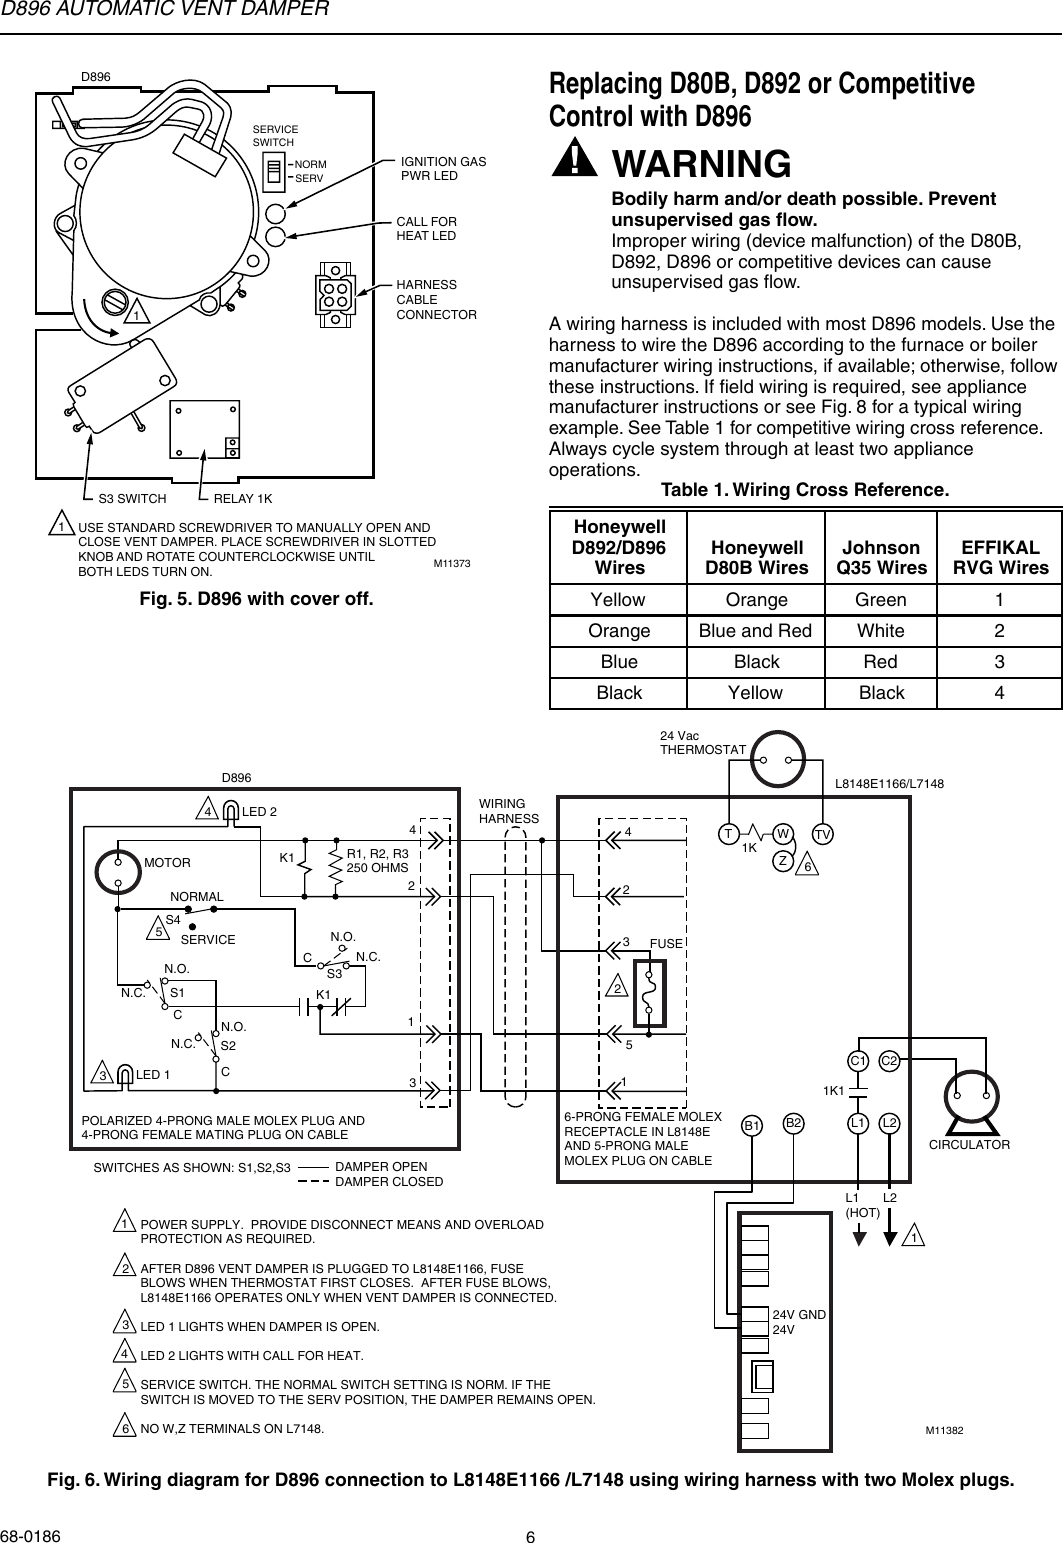 Automatic Vent Damper Wiring Diagram from usermanual.wiki